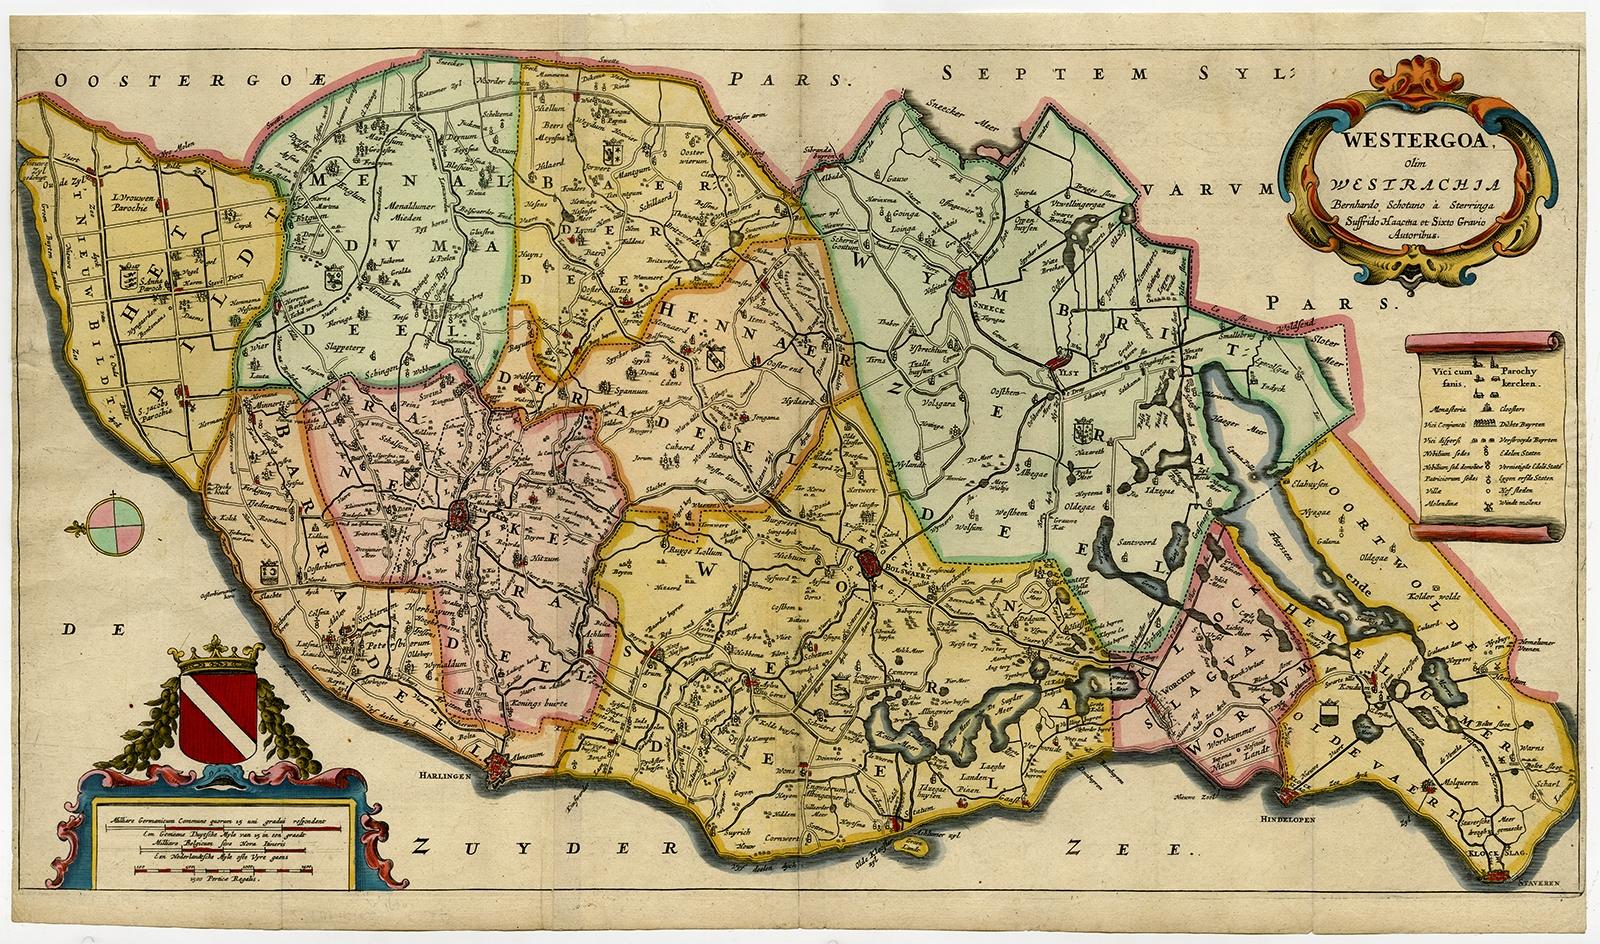 Antique map titled 'Westergoa Olim Westrachia.' 

Map of the shire of Westergo in the province of Friesland in the Netherlands, including Stavoren, Bolsward, Franeker, Sneek, Leeuwarden and other cities. Multiple cartouches, key and coat of arms.